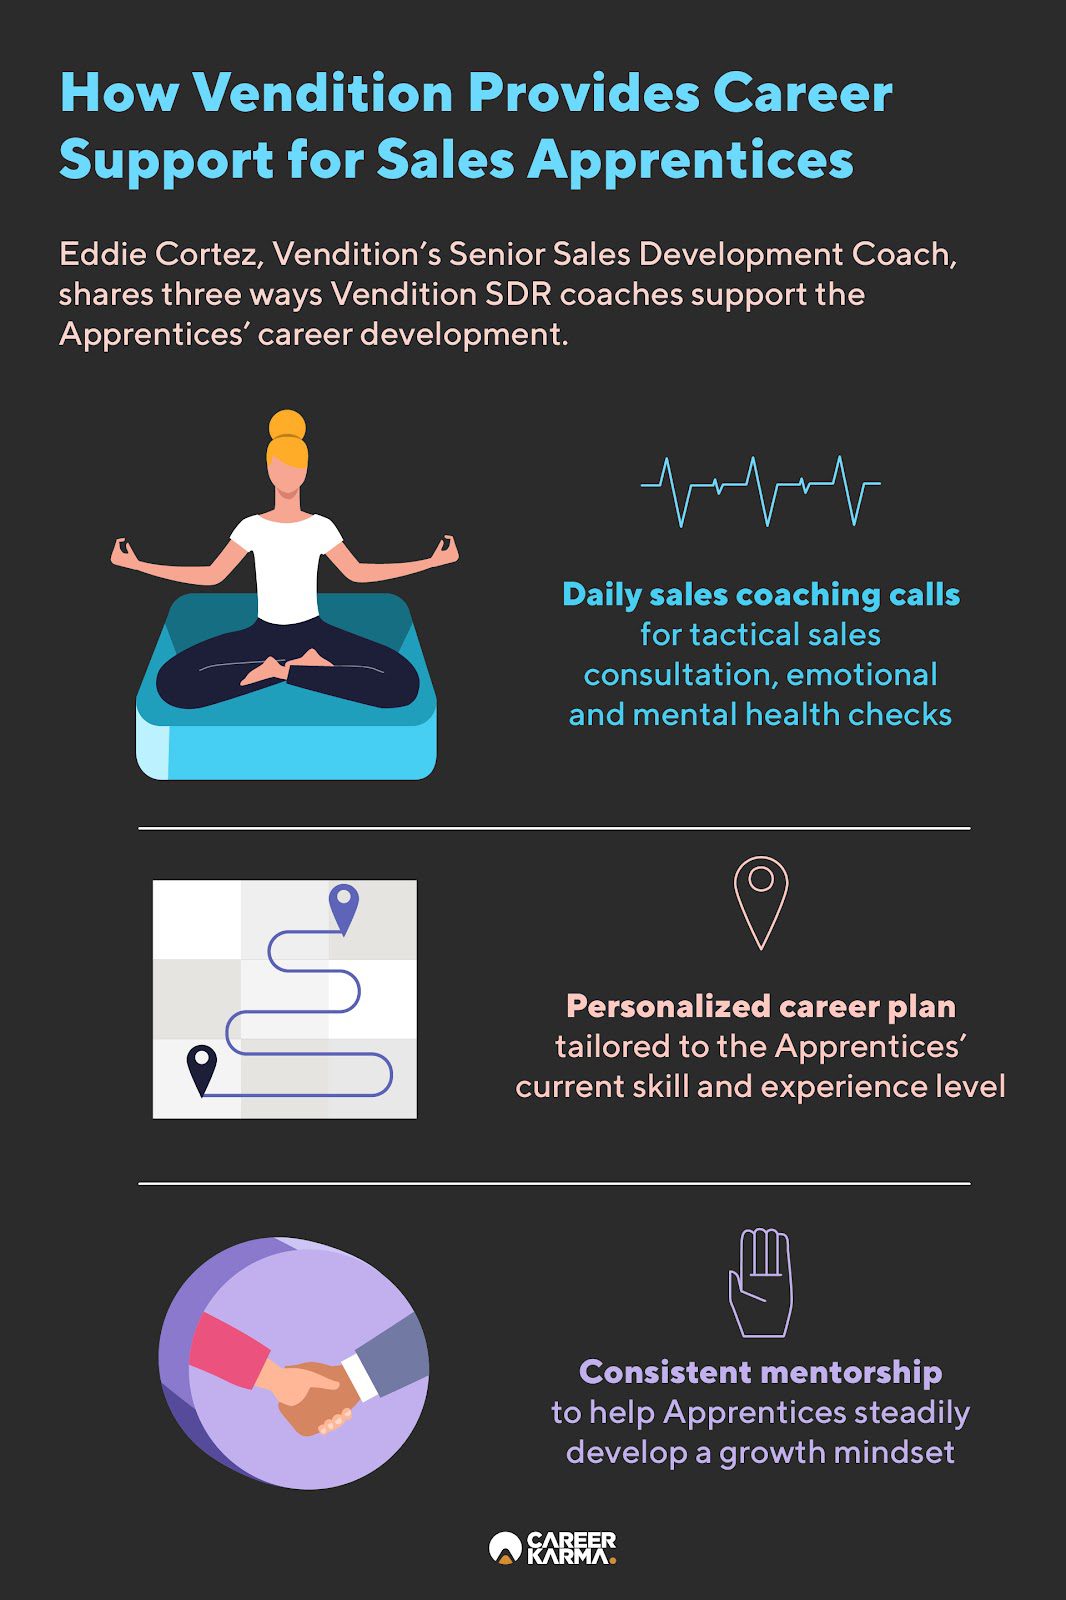 An infographic highlighting how Vendition provides career development support to sales apprentices